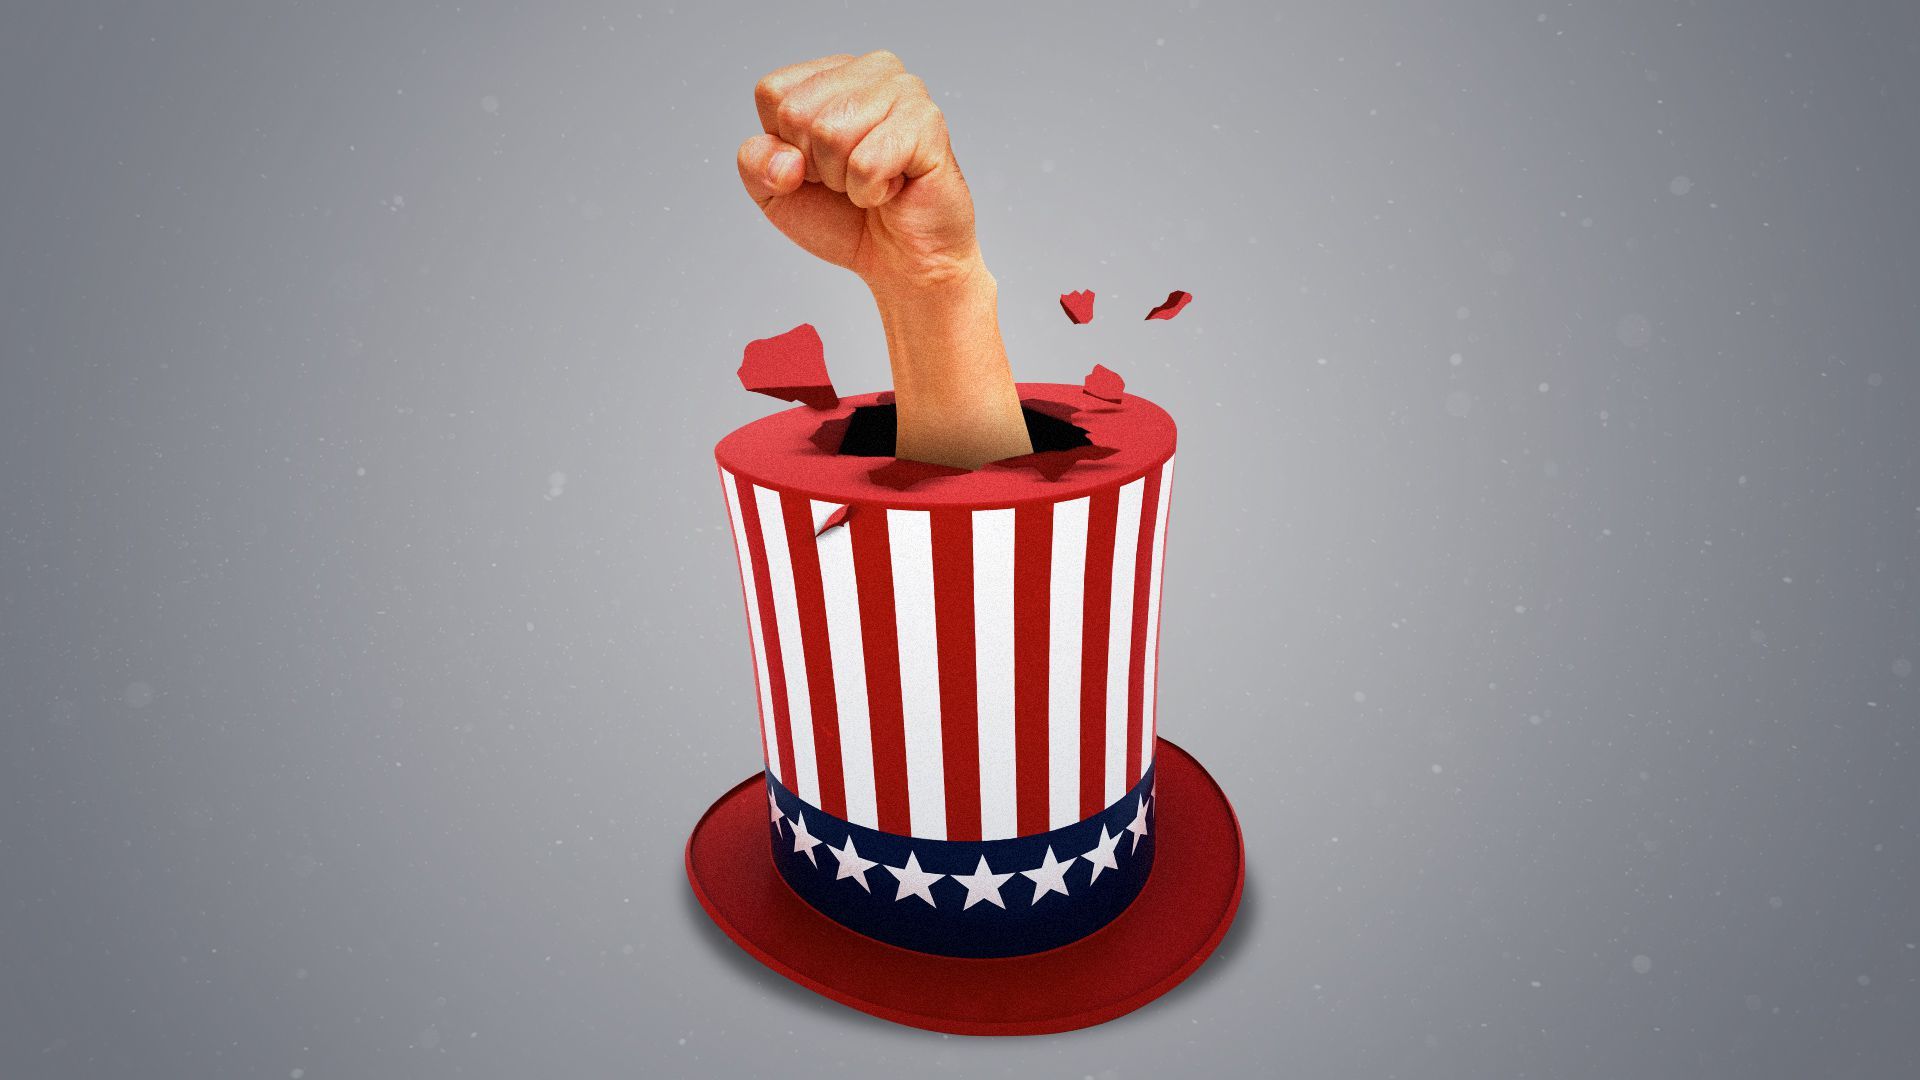 Illustration of a fist punching through the top of an Uncle Sam top hat.  